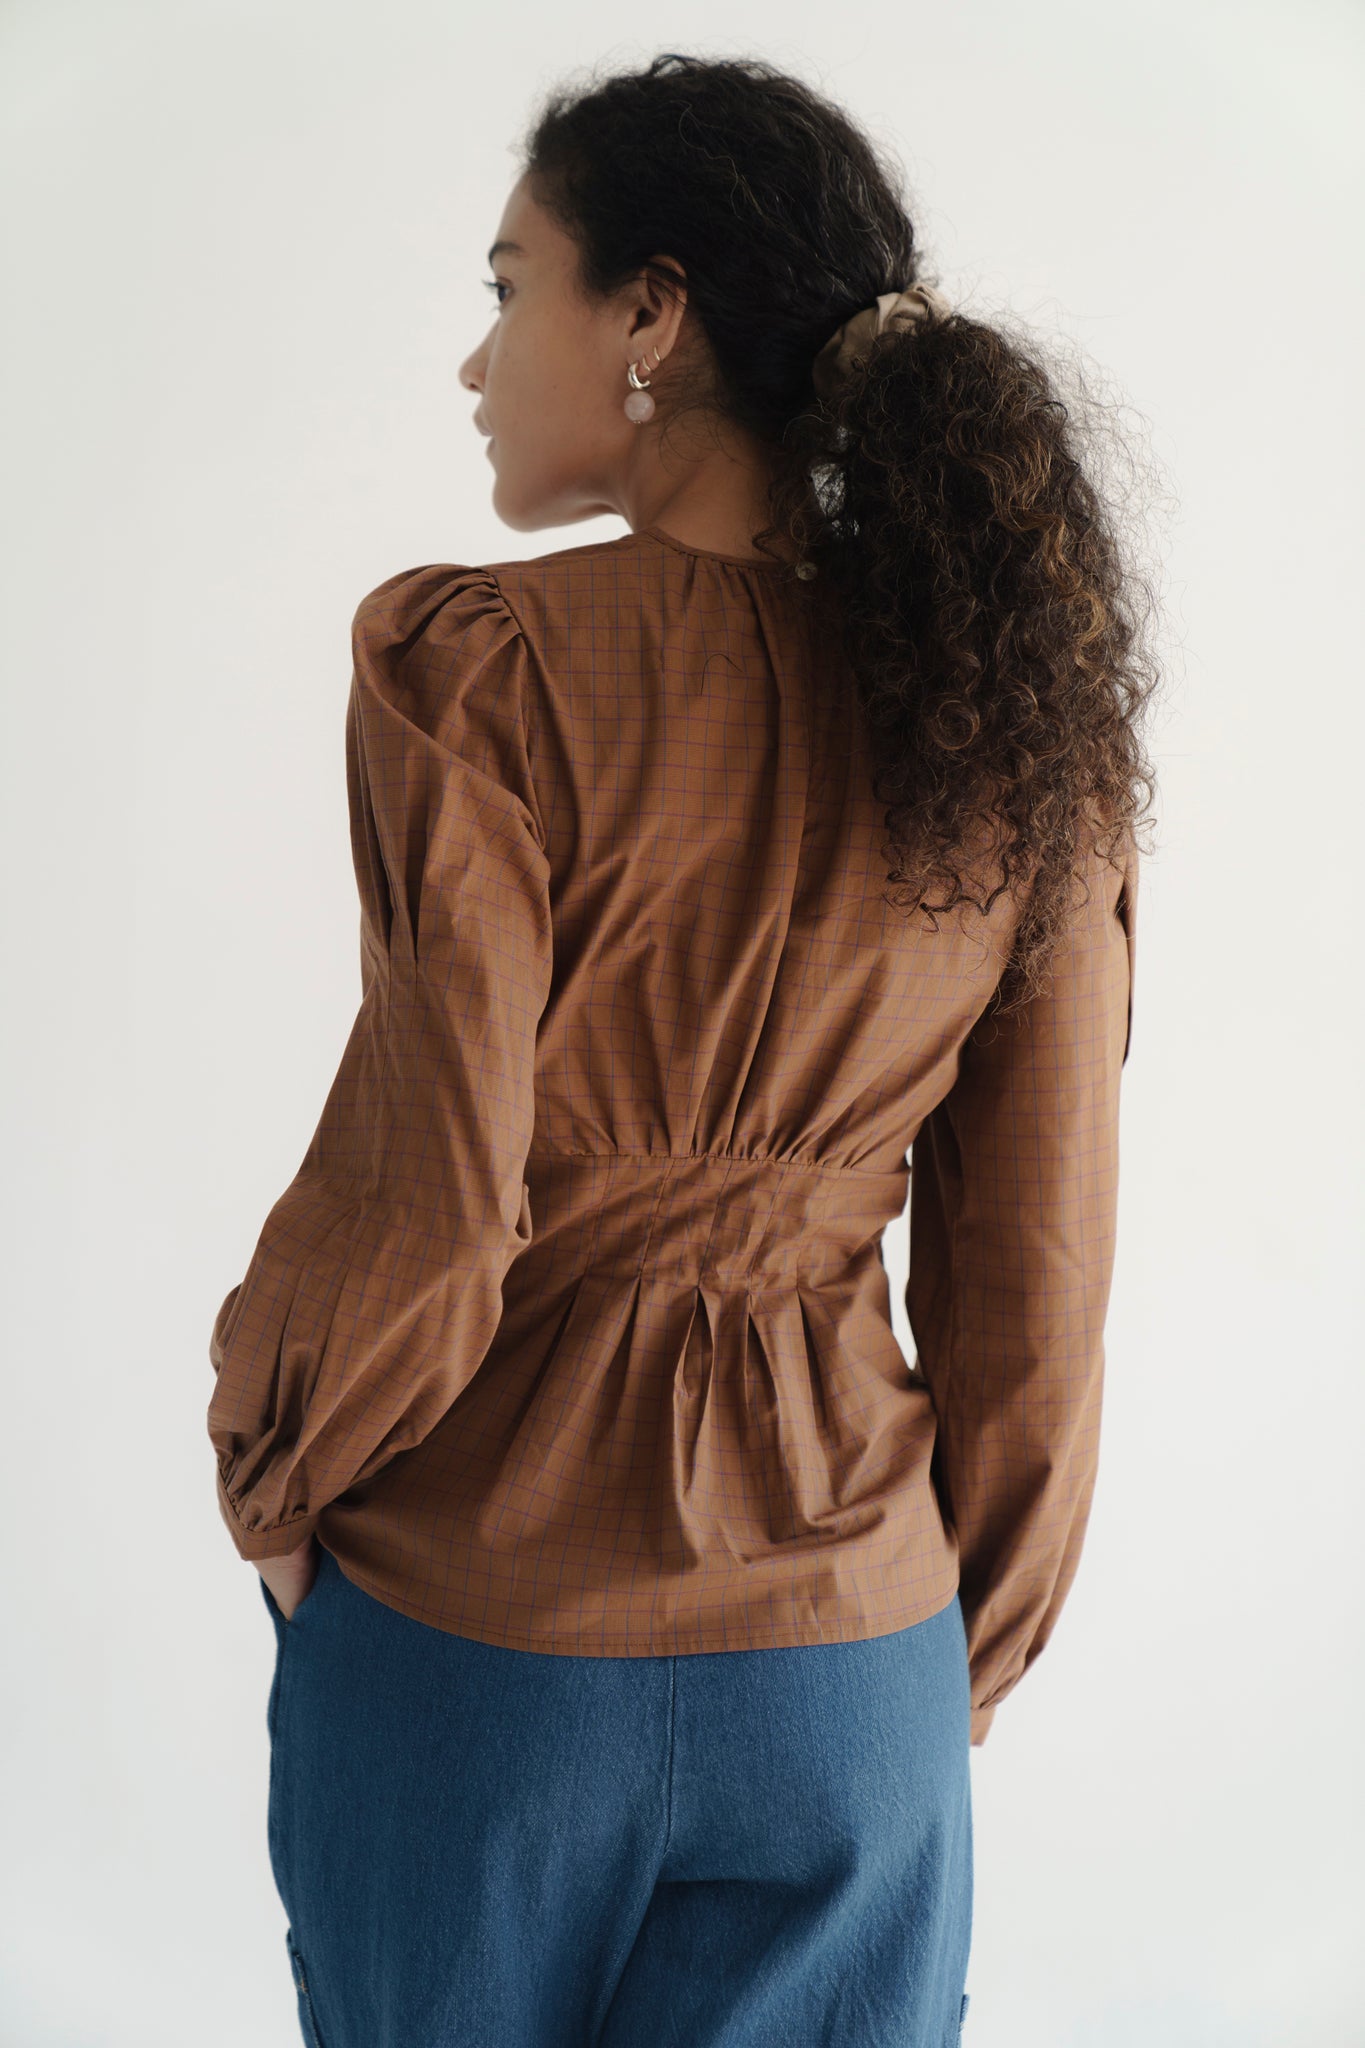 centra blouse in tierra grid